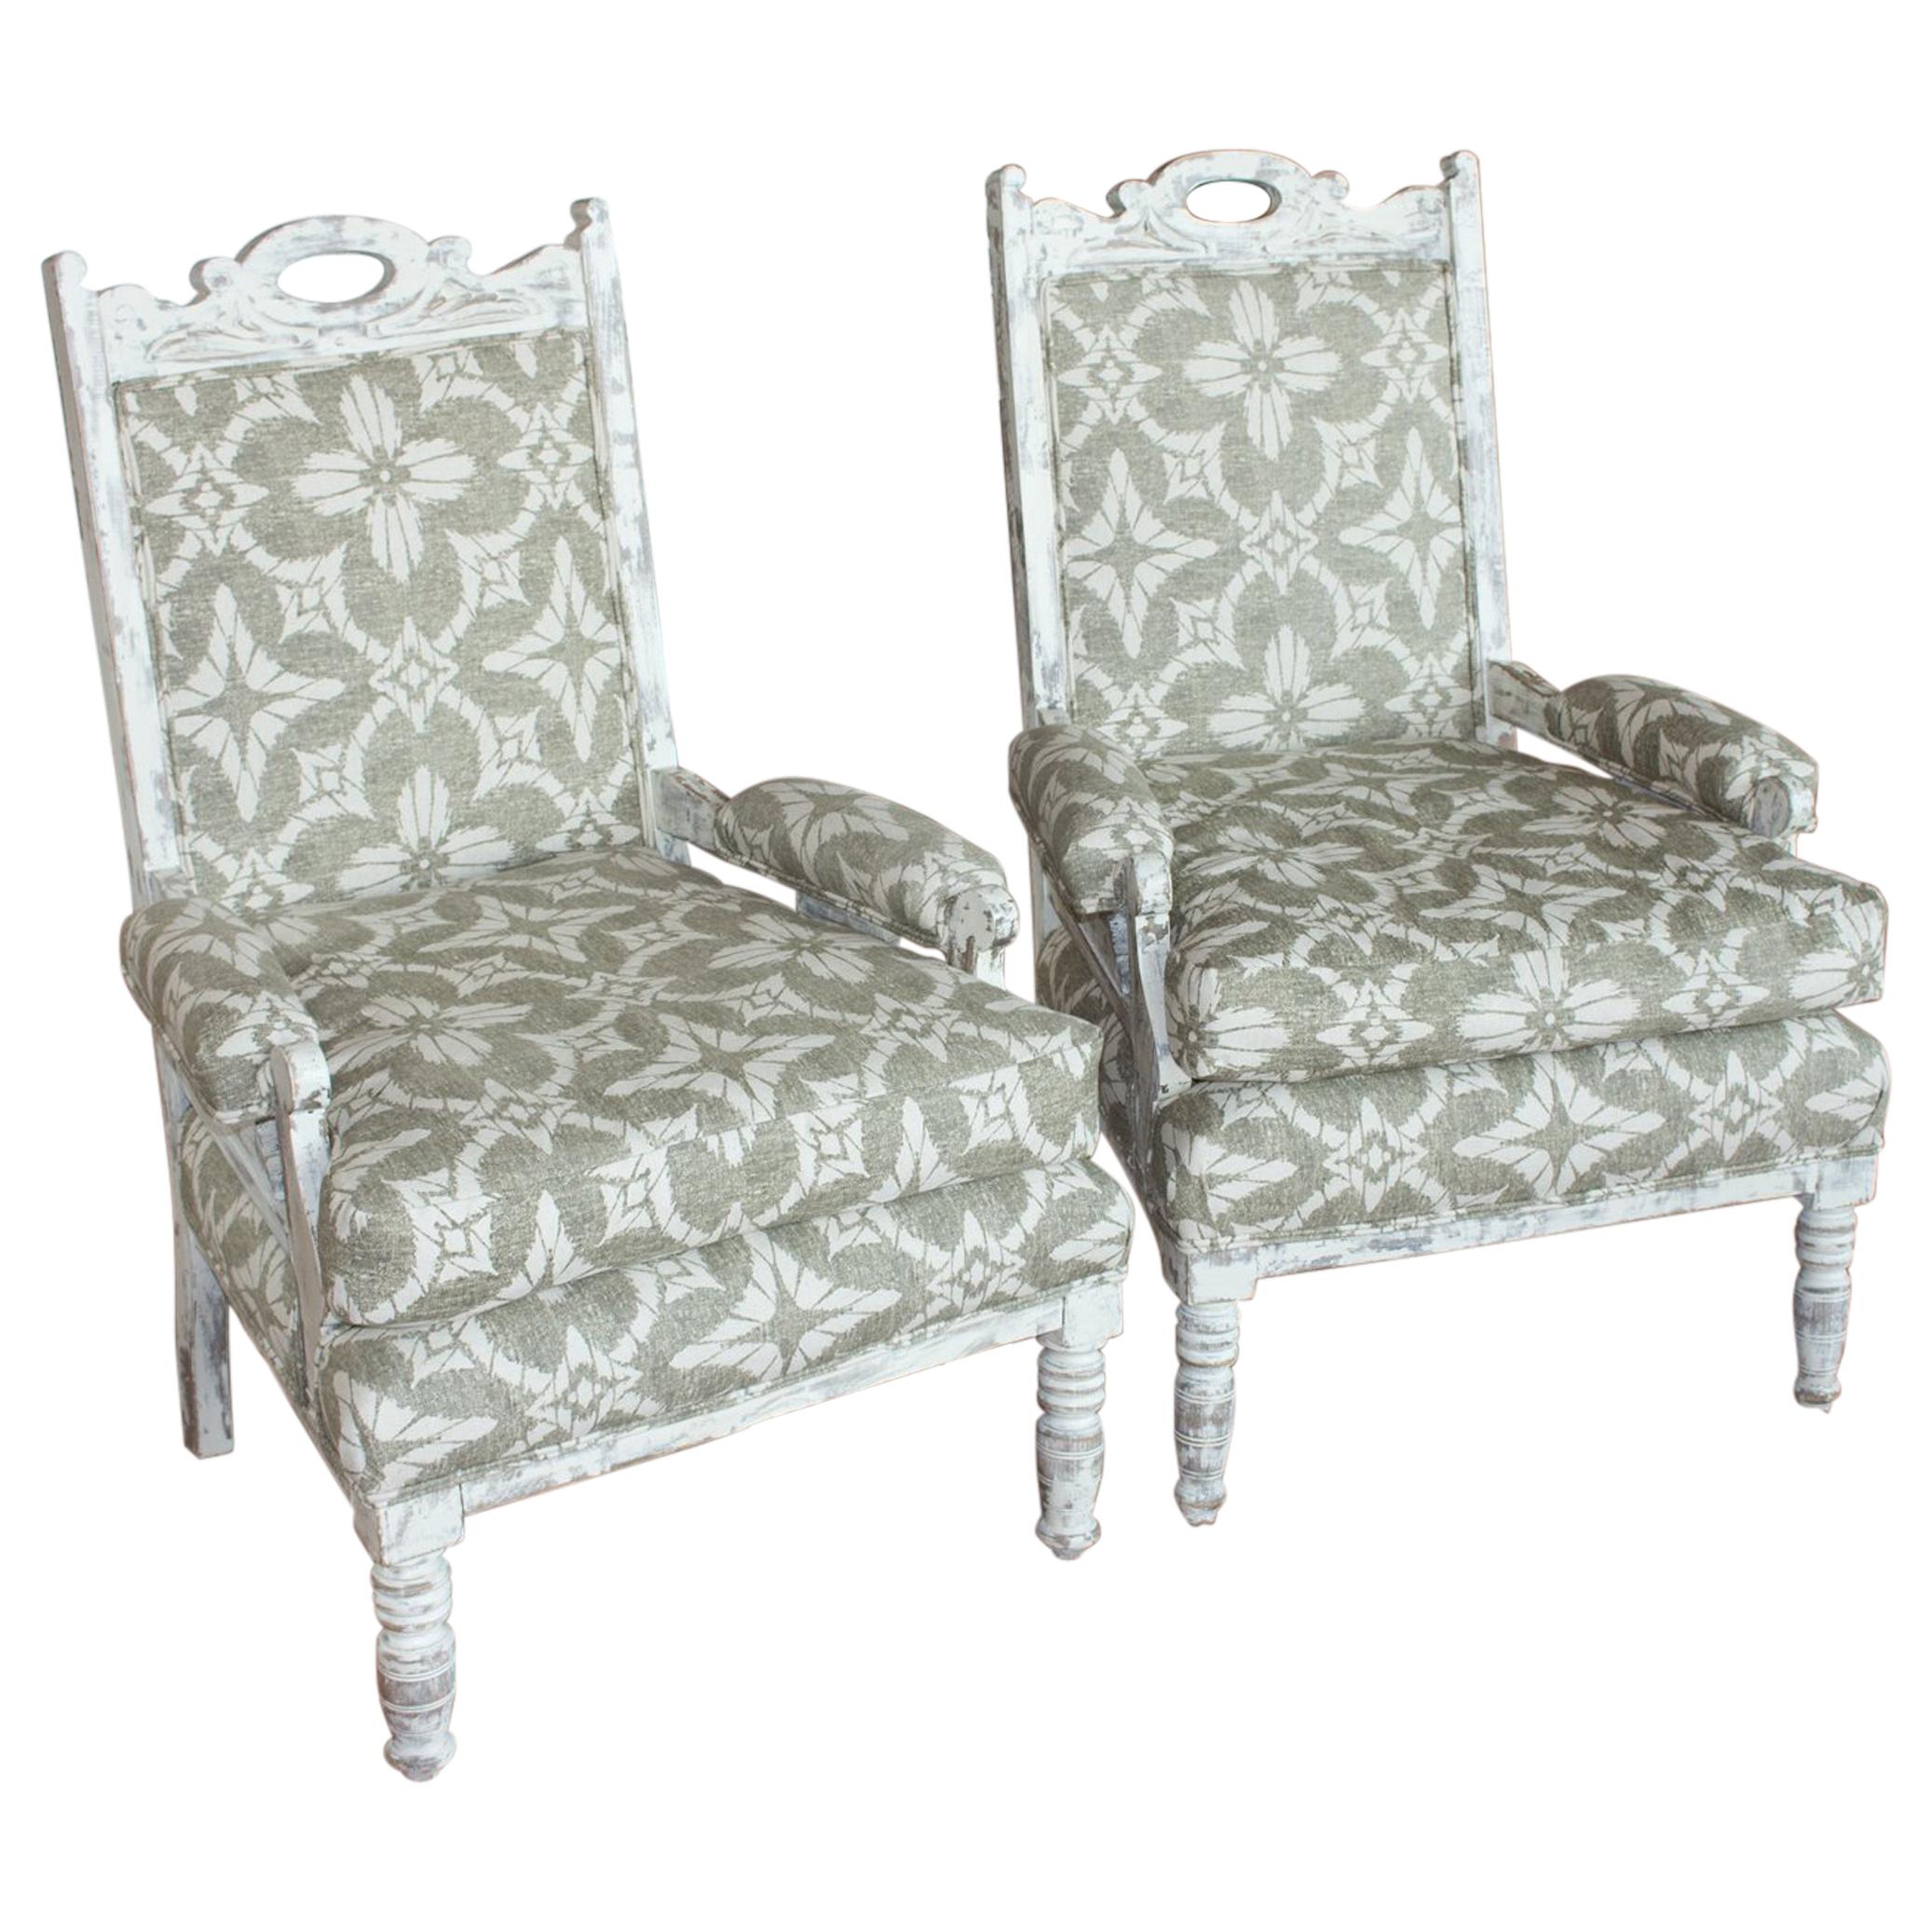 Pair of English Edwardian Upholstered Library Chairs